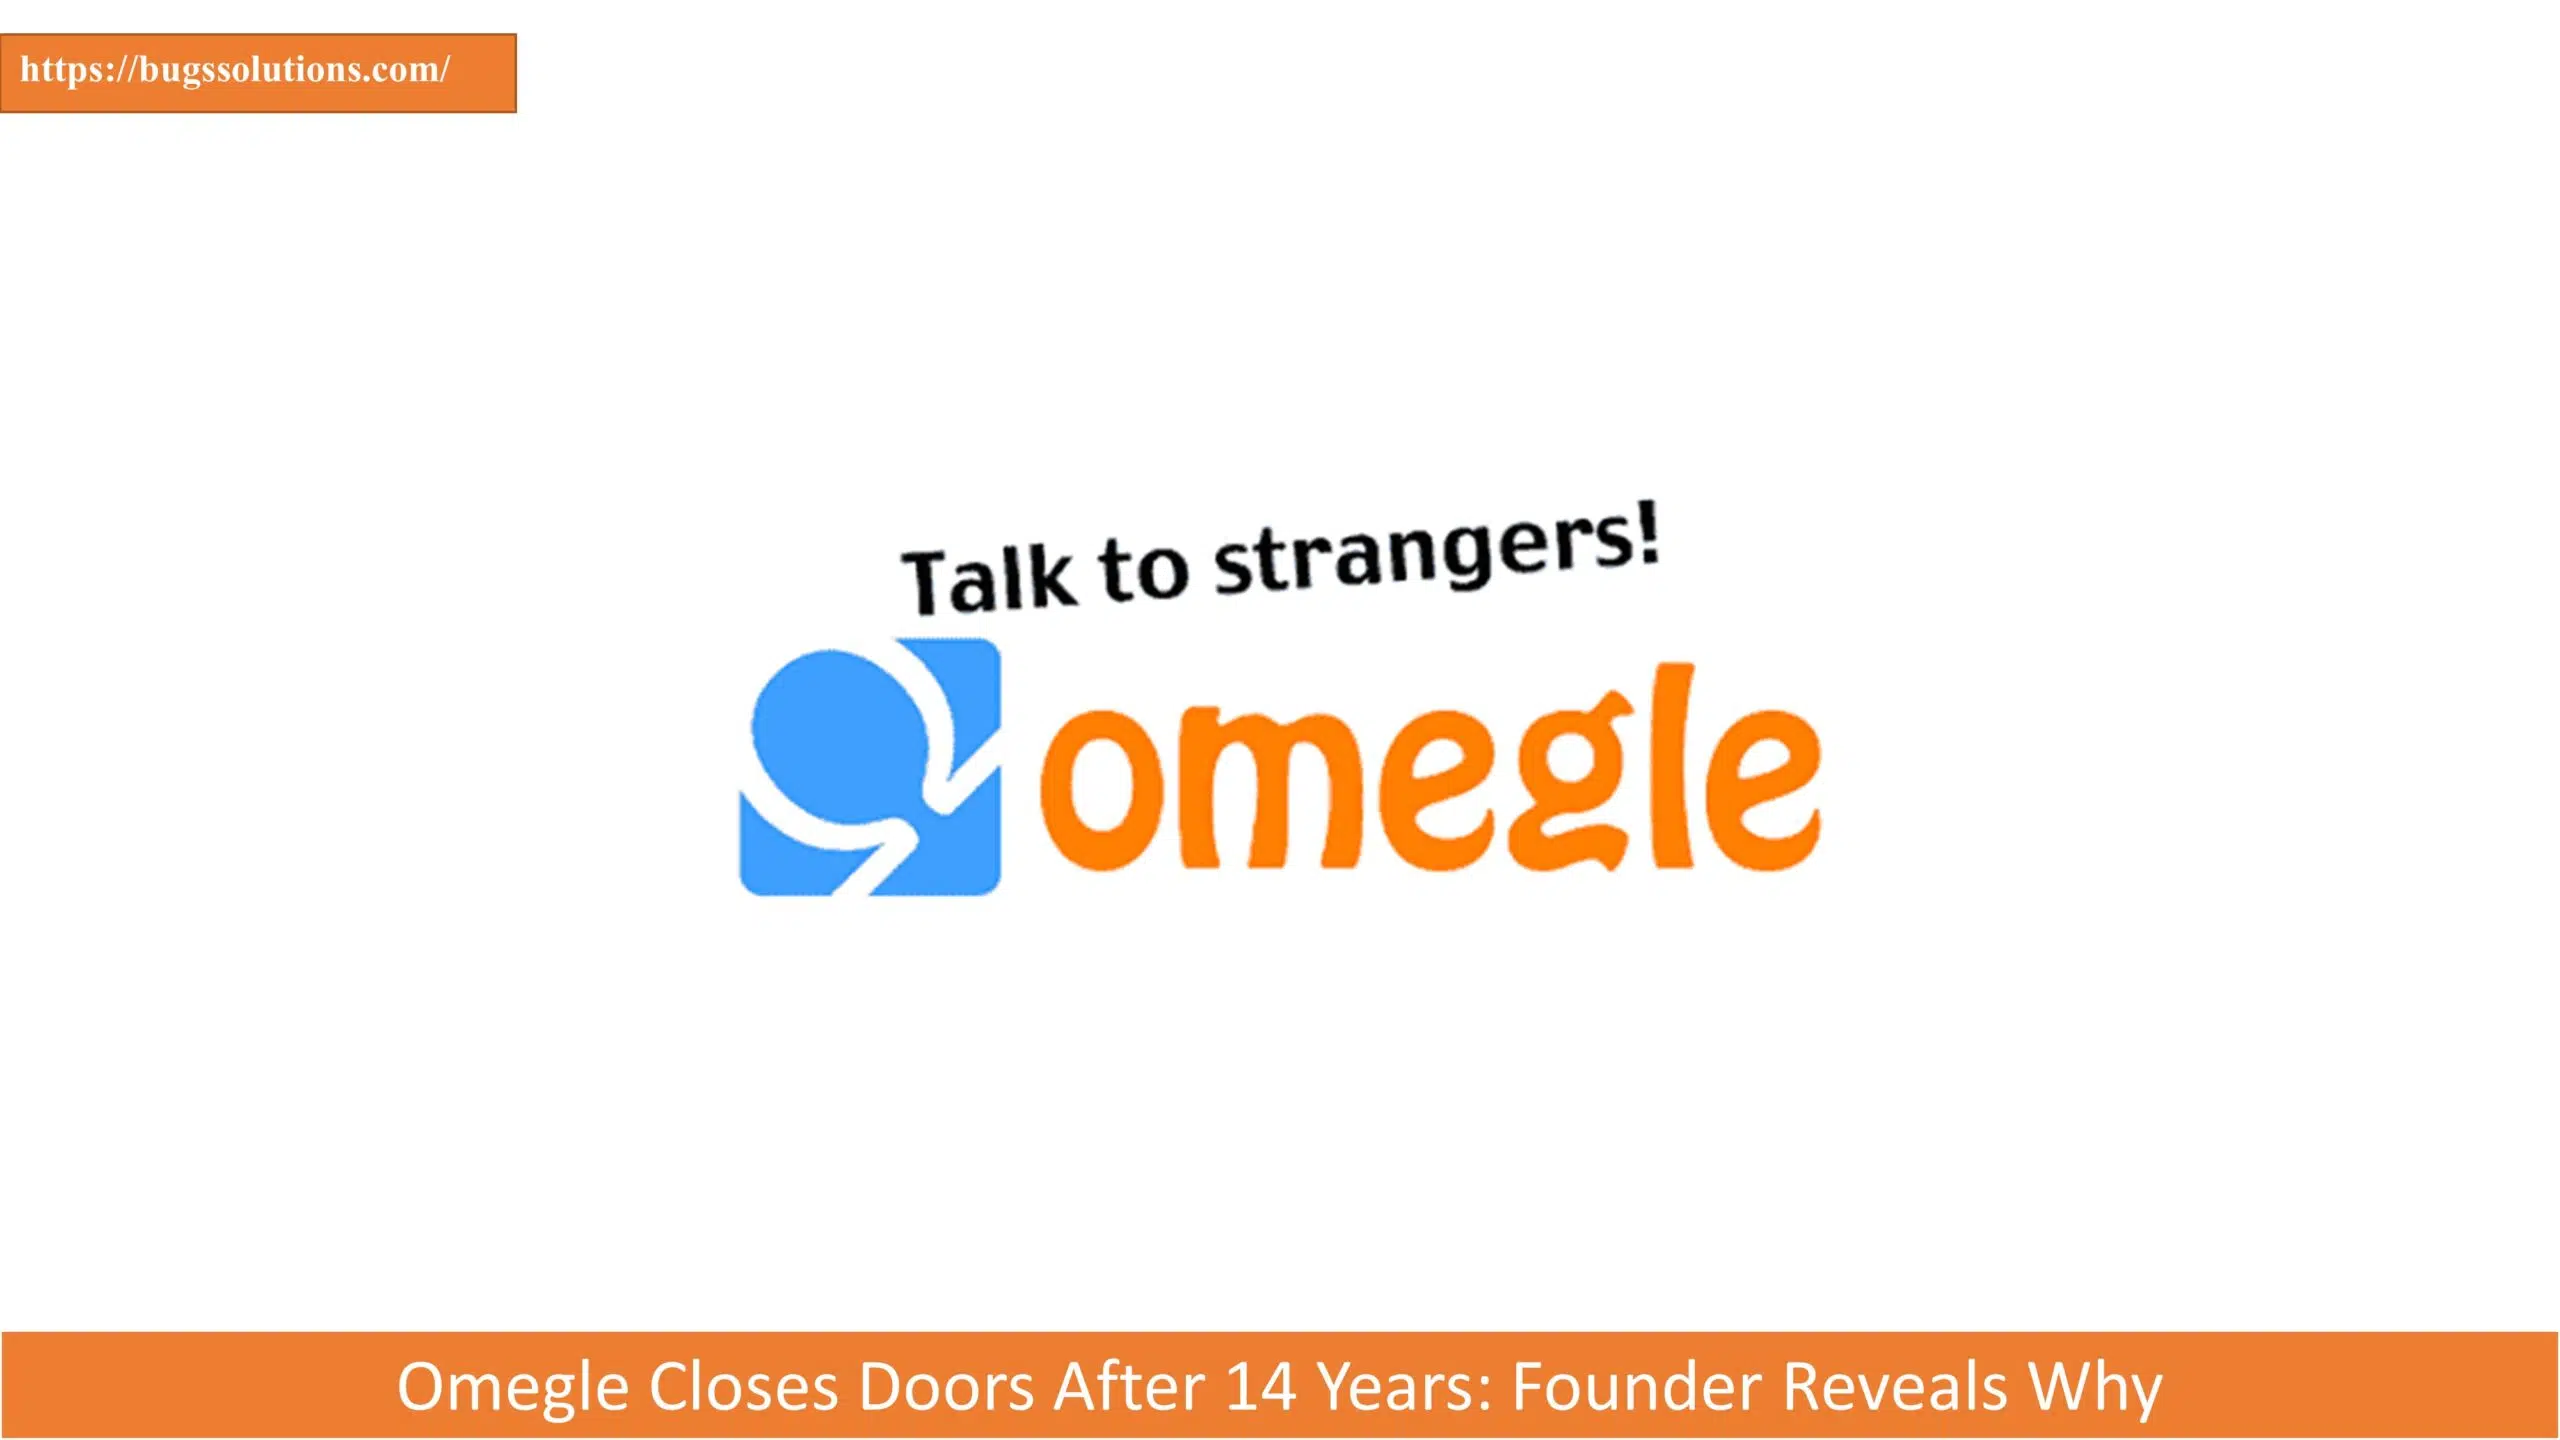 Omegle Closes Doors After 14 Years: Founder Reveals Why